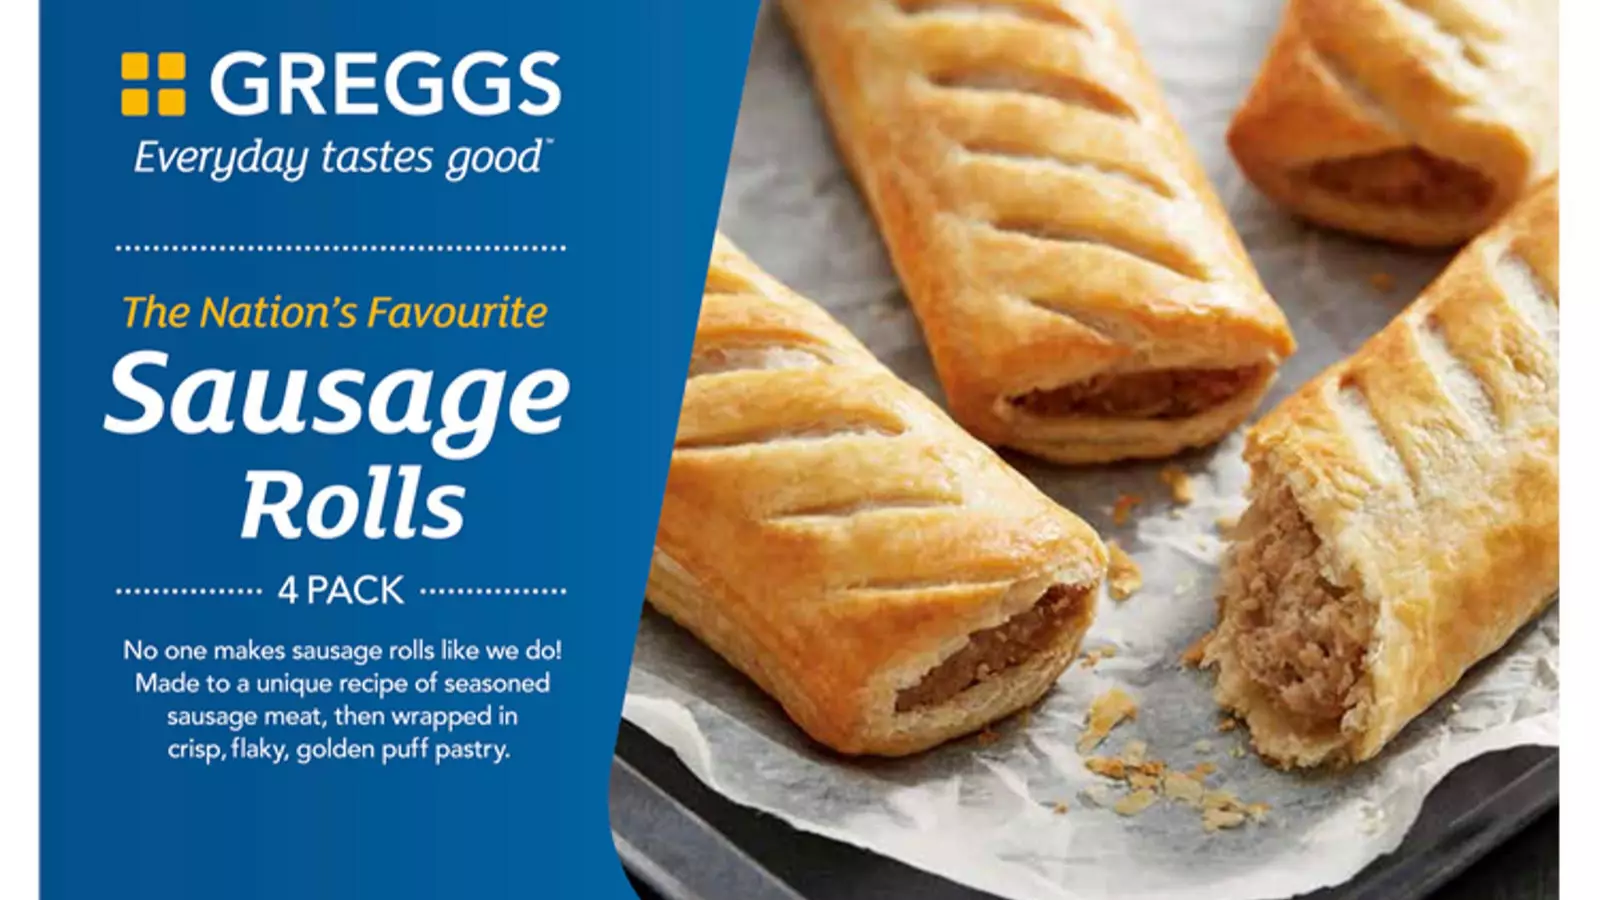 Iceland Are Increasing Their Greggs Stock While The Bakeries Are Closed